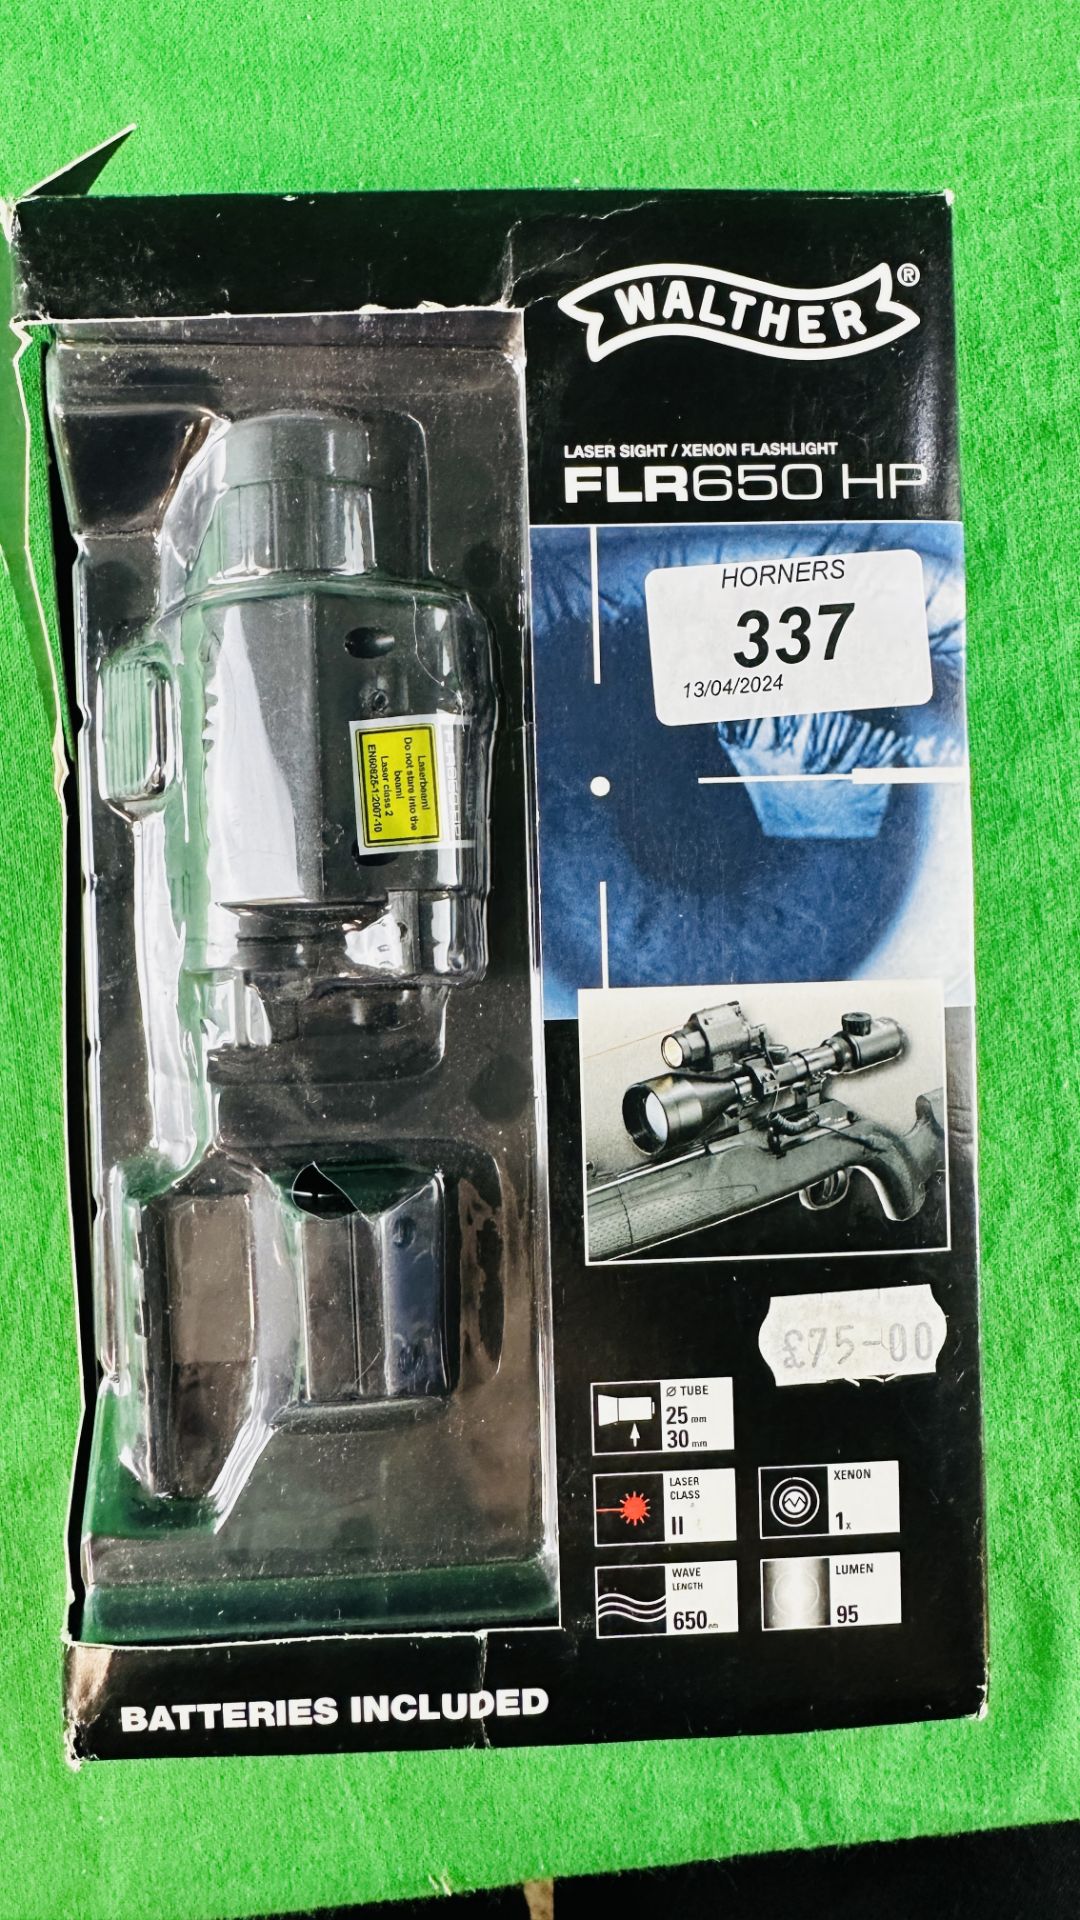 A BOXED WALTHER FLR650HP LASER SIGHT/XEON FLASHLIGHT